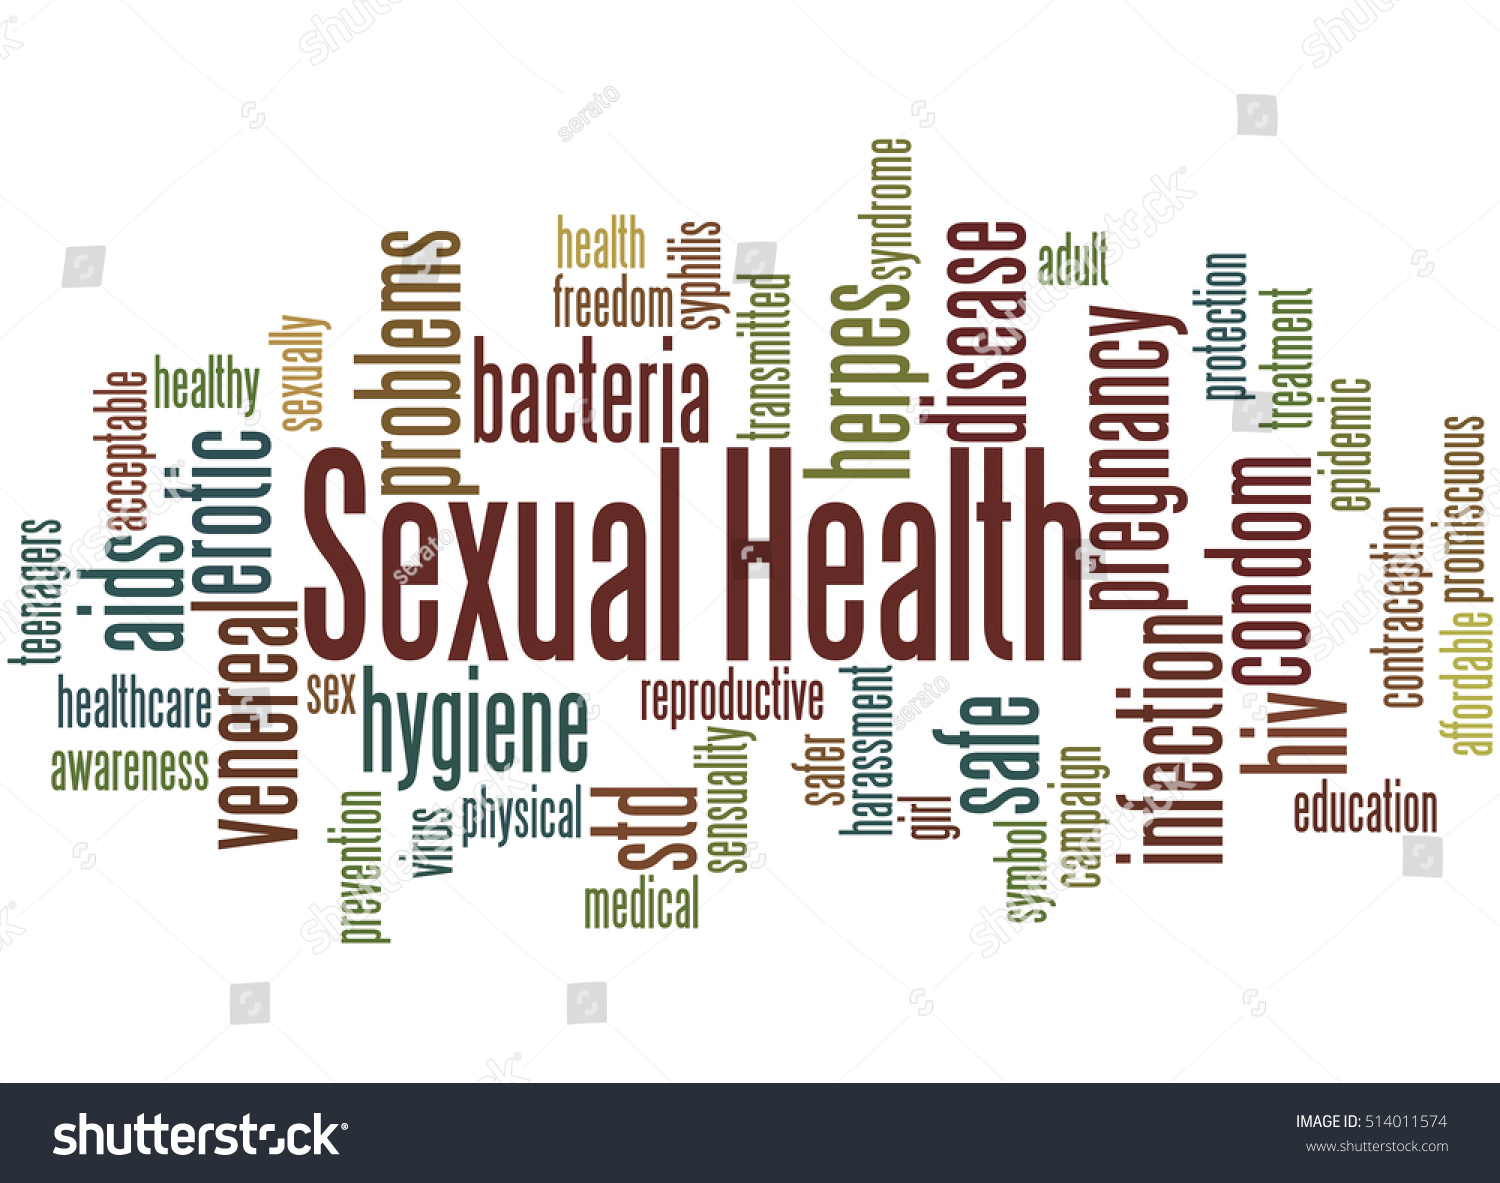 Sexual Health Word Cloud Concept On Stock Illustration 514011574 Shutterstock 6577